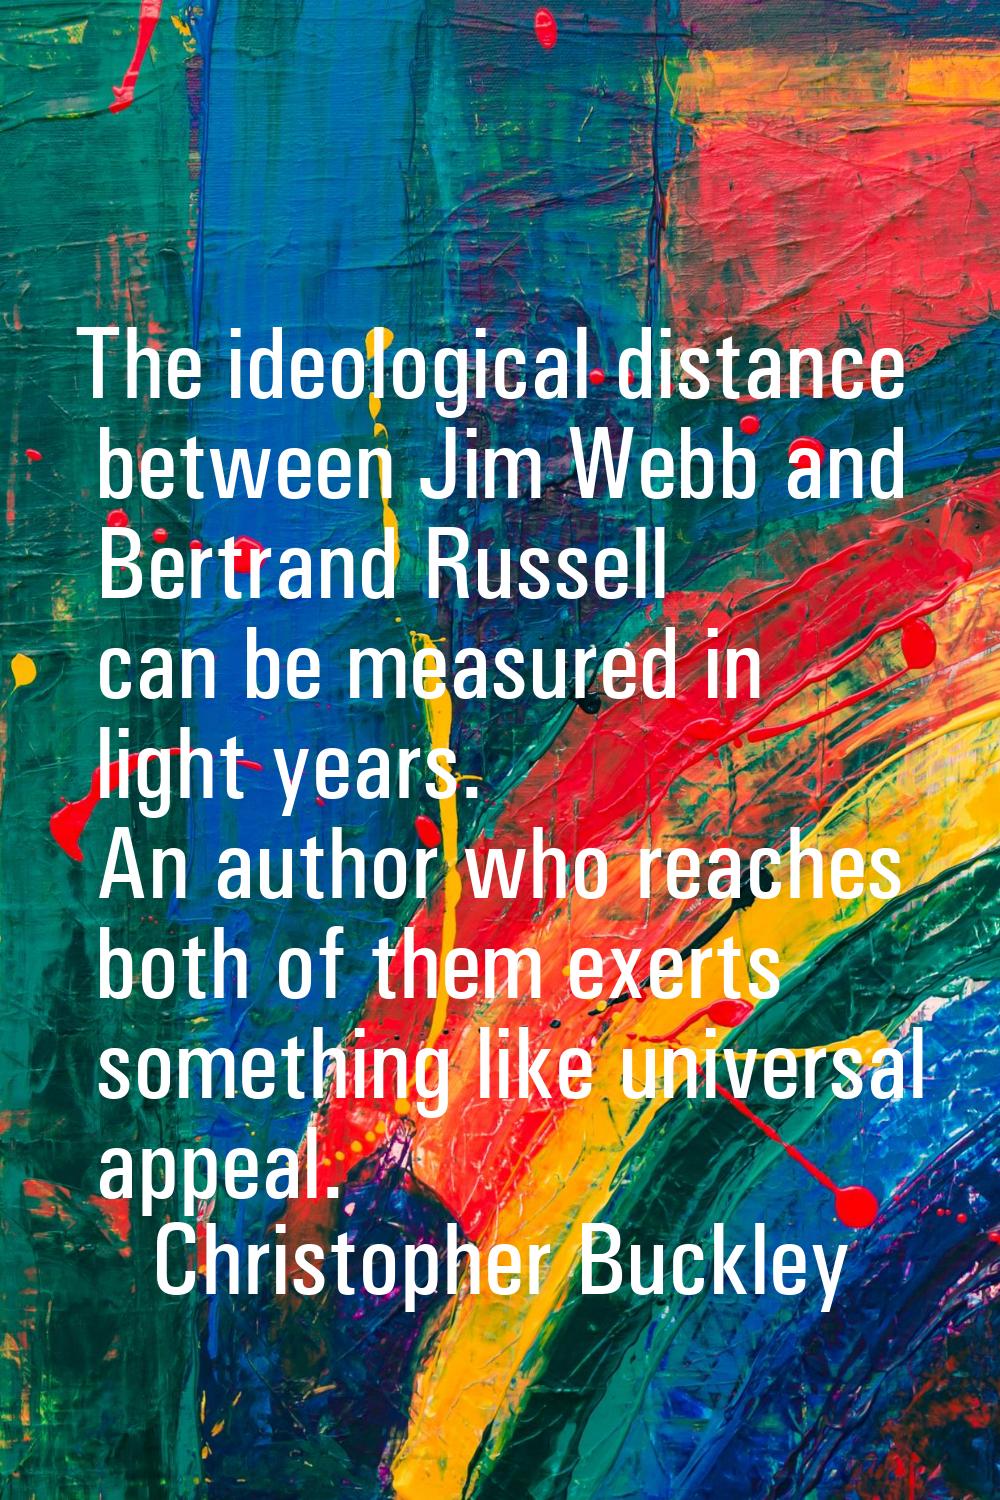 The ideological distance between Jim Webb and Bertrand Russell can be measured in light years. An a